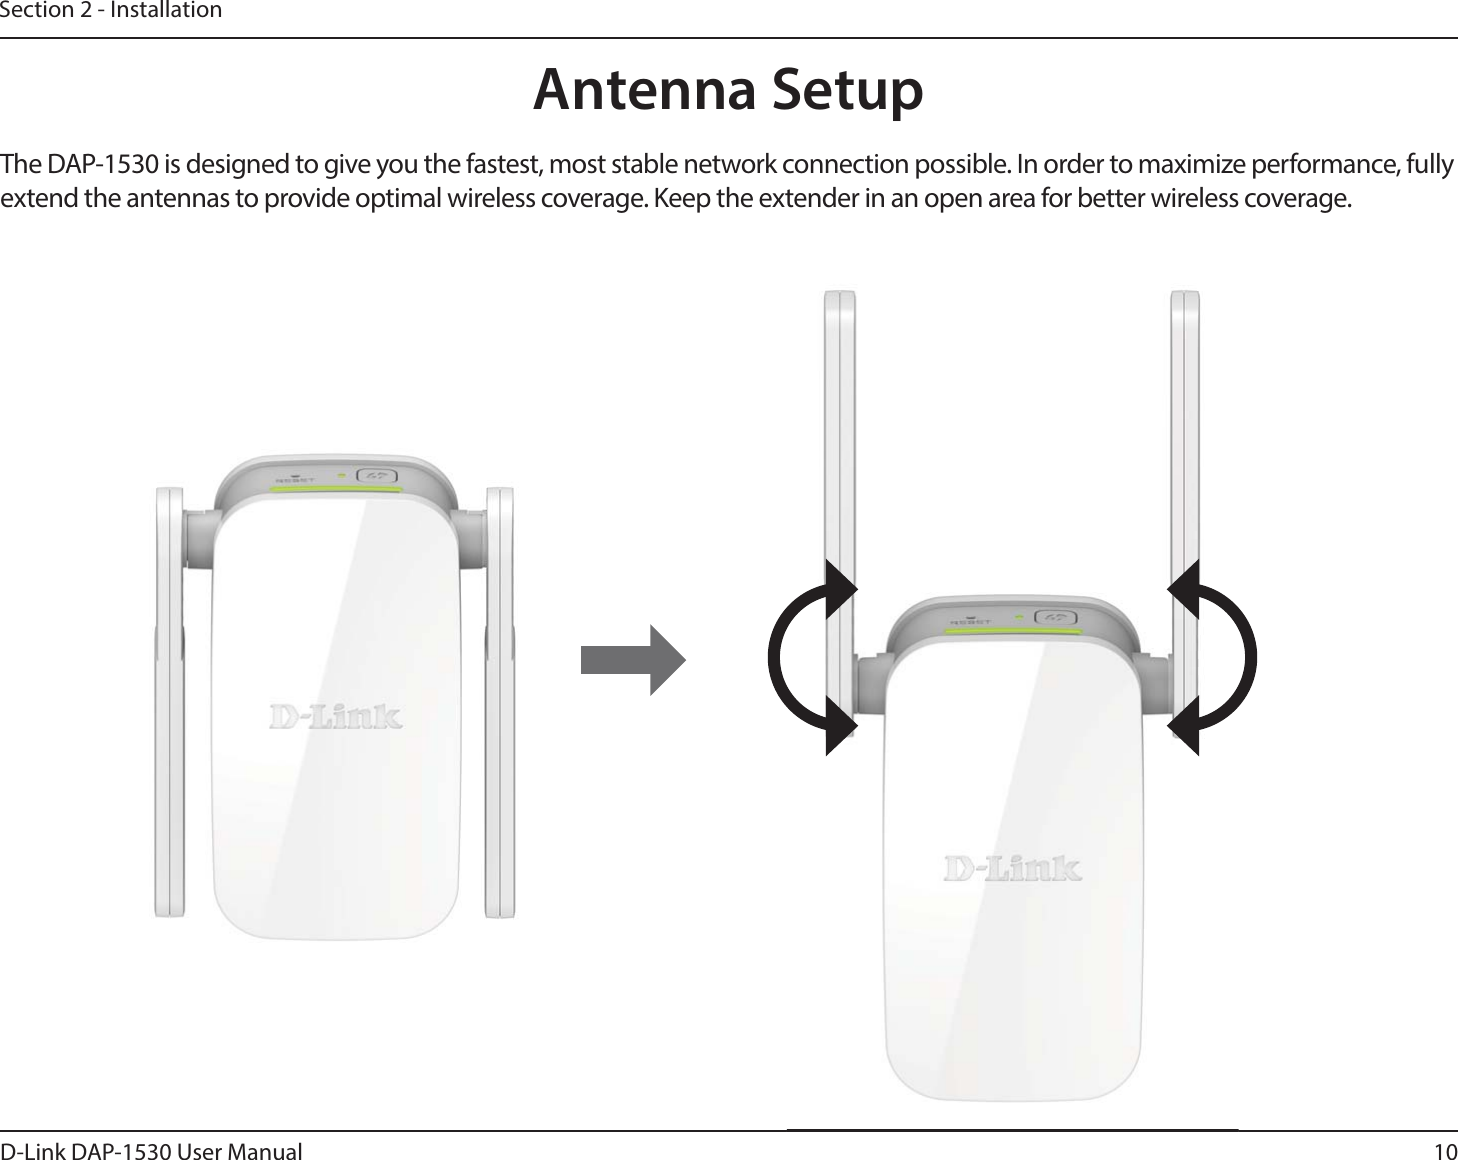 10D-Link DAP-1530 User ManualSection 2 - InstallationAntenna SetupThe DAP-1530 is designed to give you the fastest, most stable network connection possible. In order to maximize performance, fully extend the antennas to provide optimal wireless coverage. Keep the extender in an open area for better wireless coverage. 